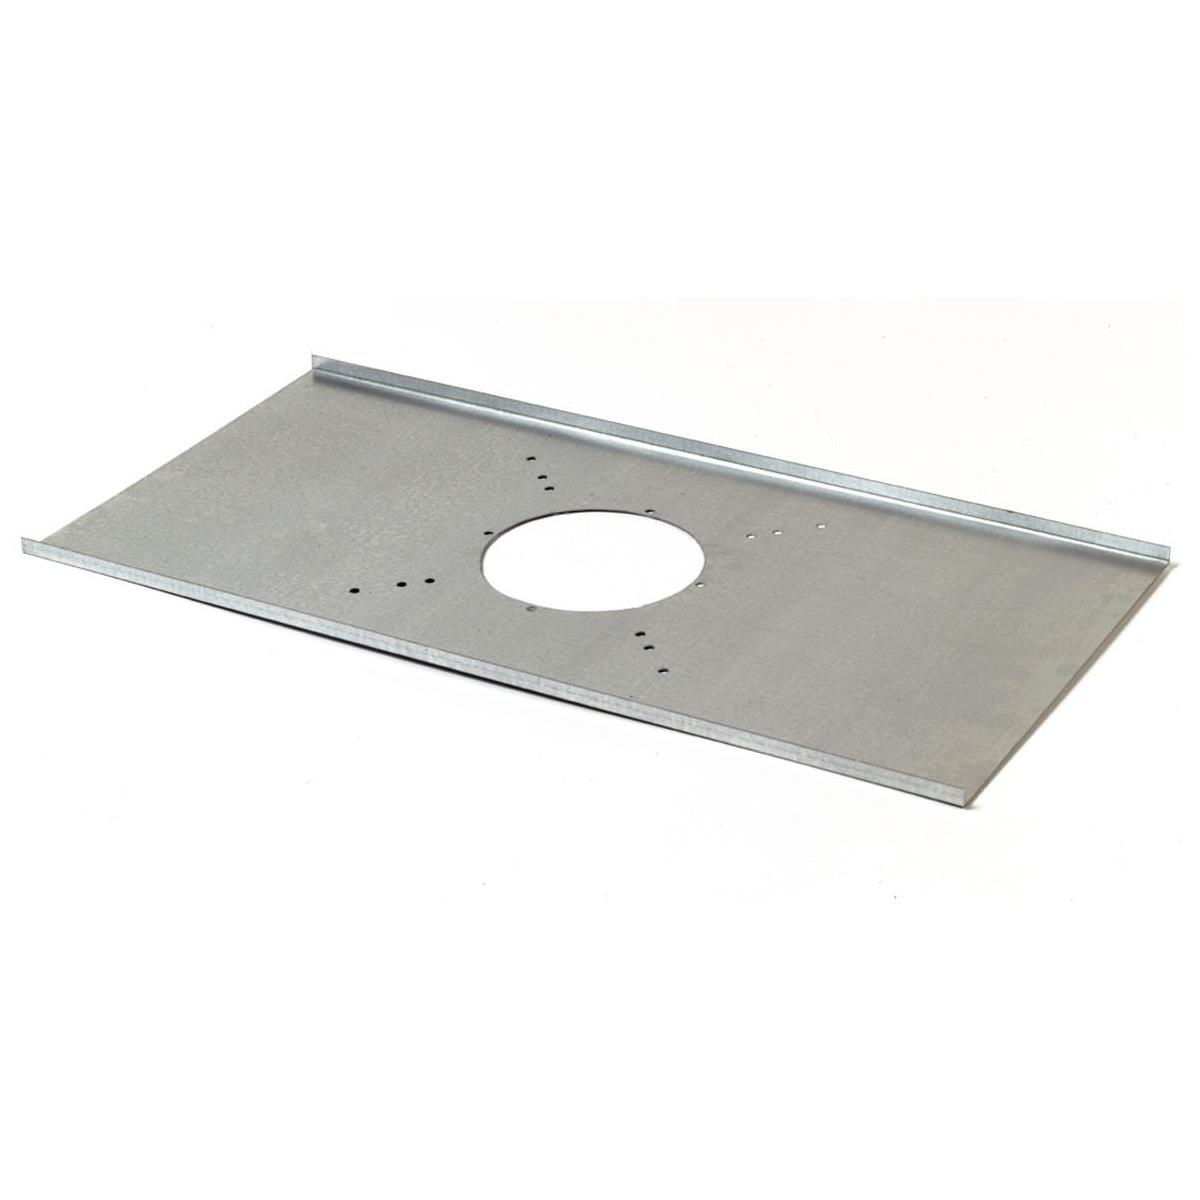 

Lowell Manufacturing LBS4-DX Tile Bridge with 6.3" Round Opening for 4" Speaker